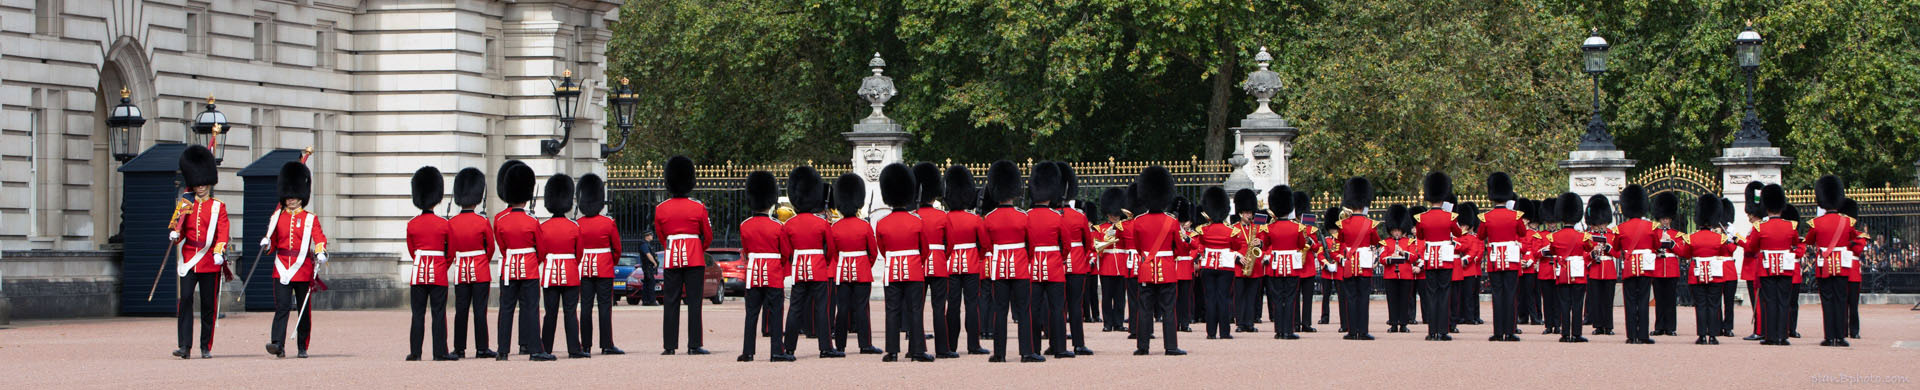 Changing the Guards ceremony in Buckingham Palace